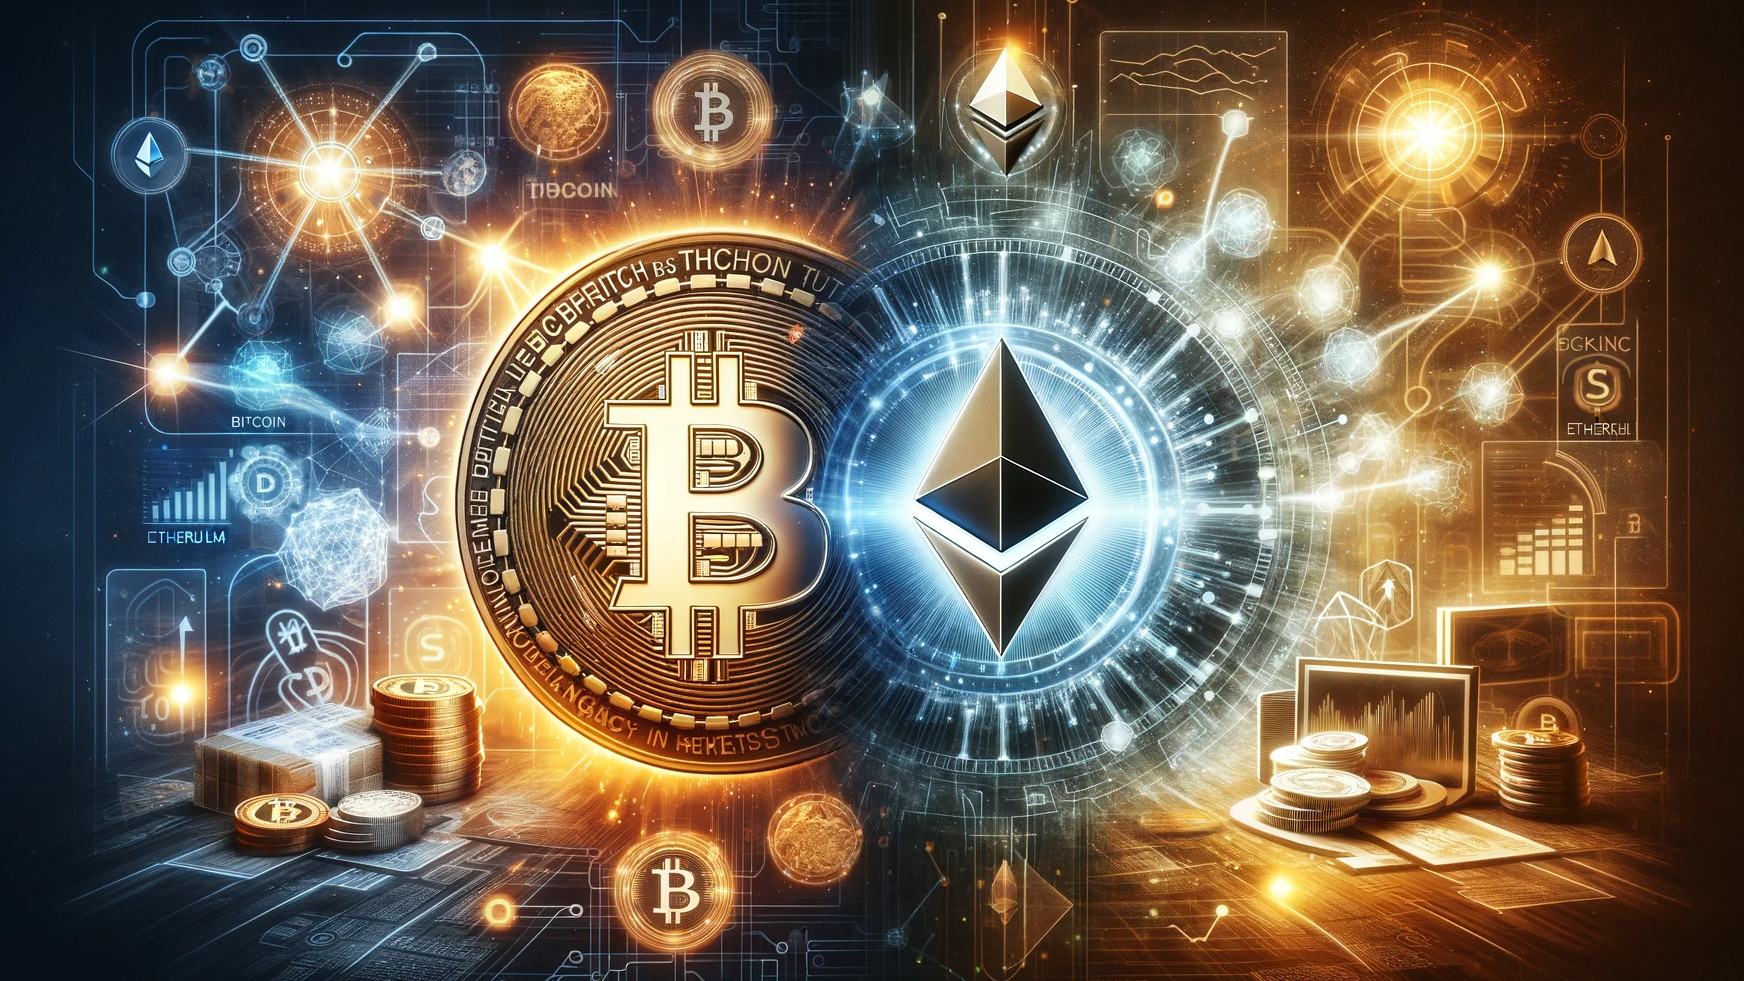 Bitcoin vs Ethereum: What Are the Differences as a Technology, Investment and Payment Method?